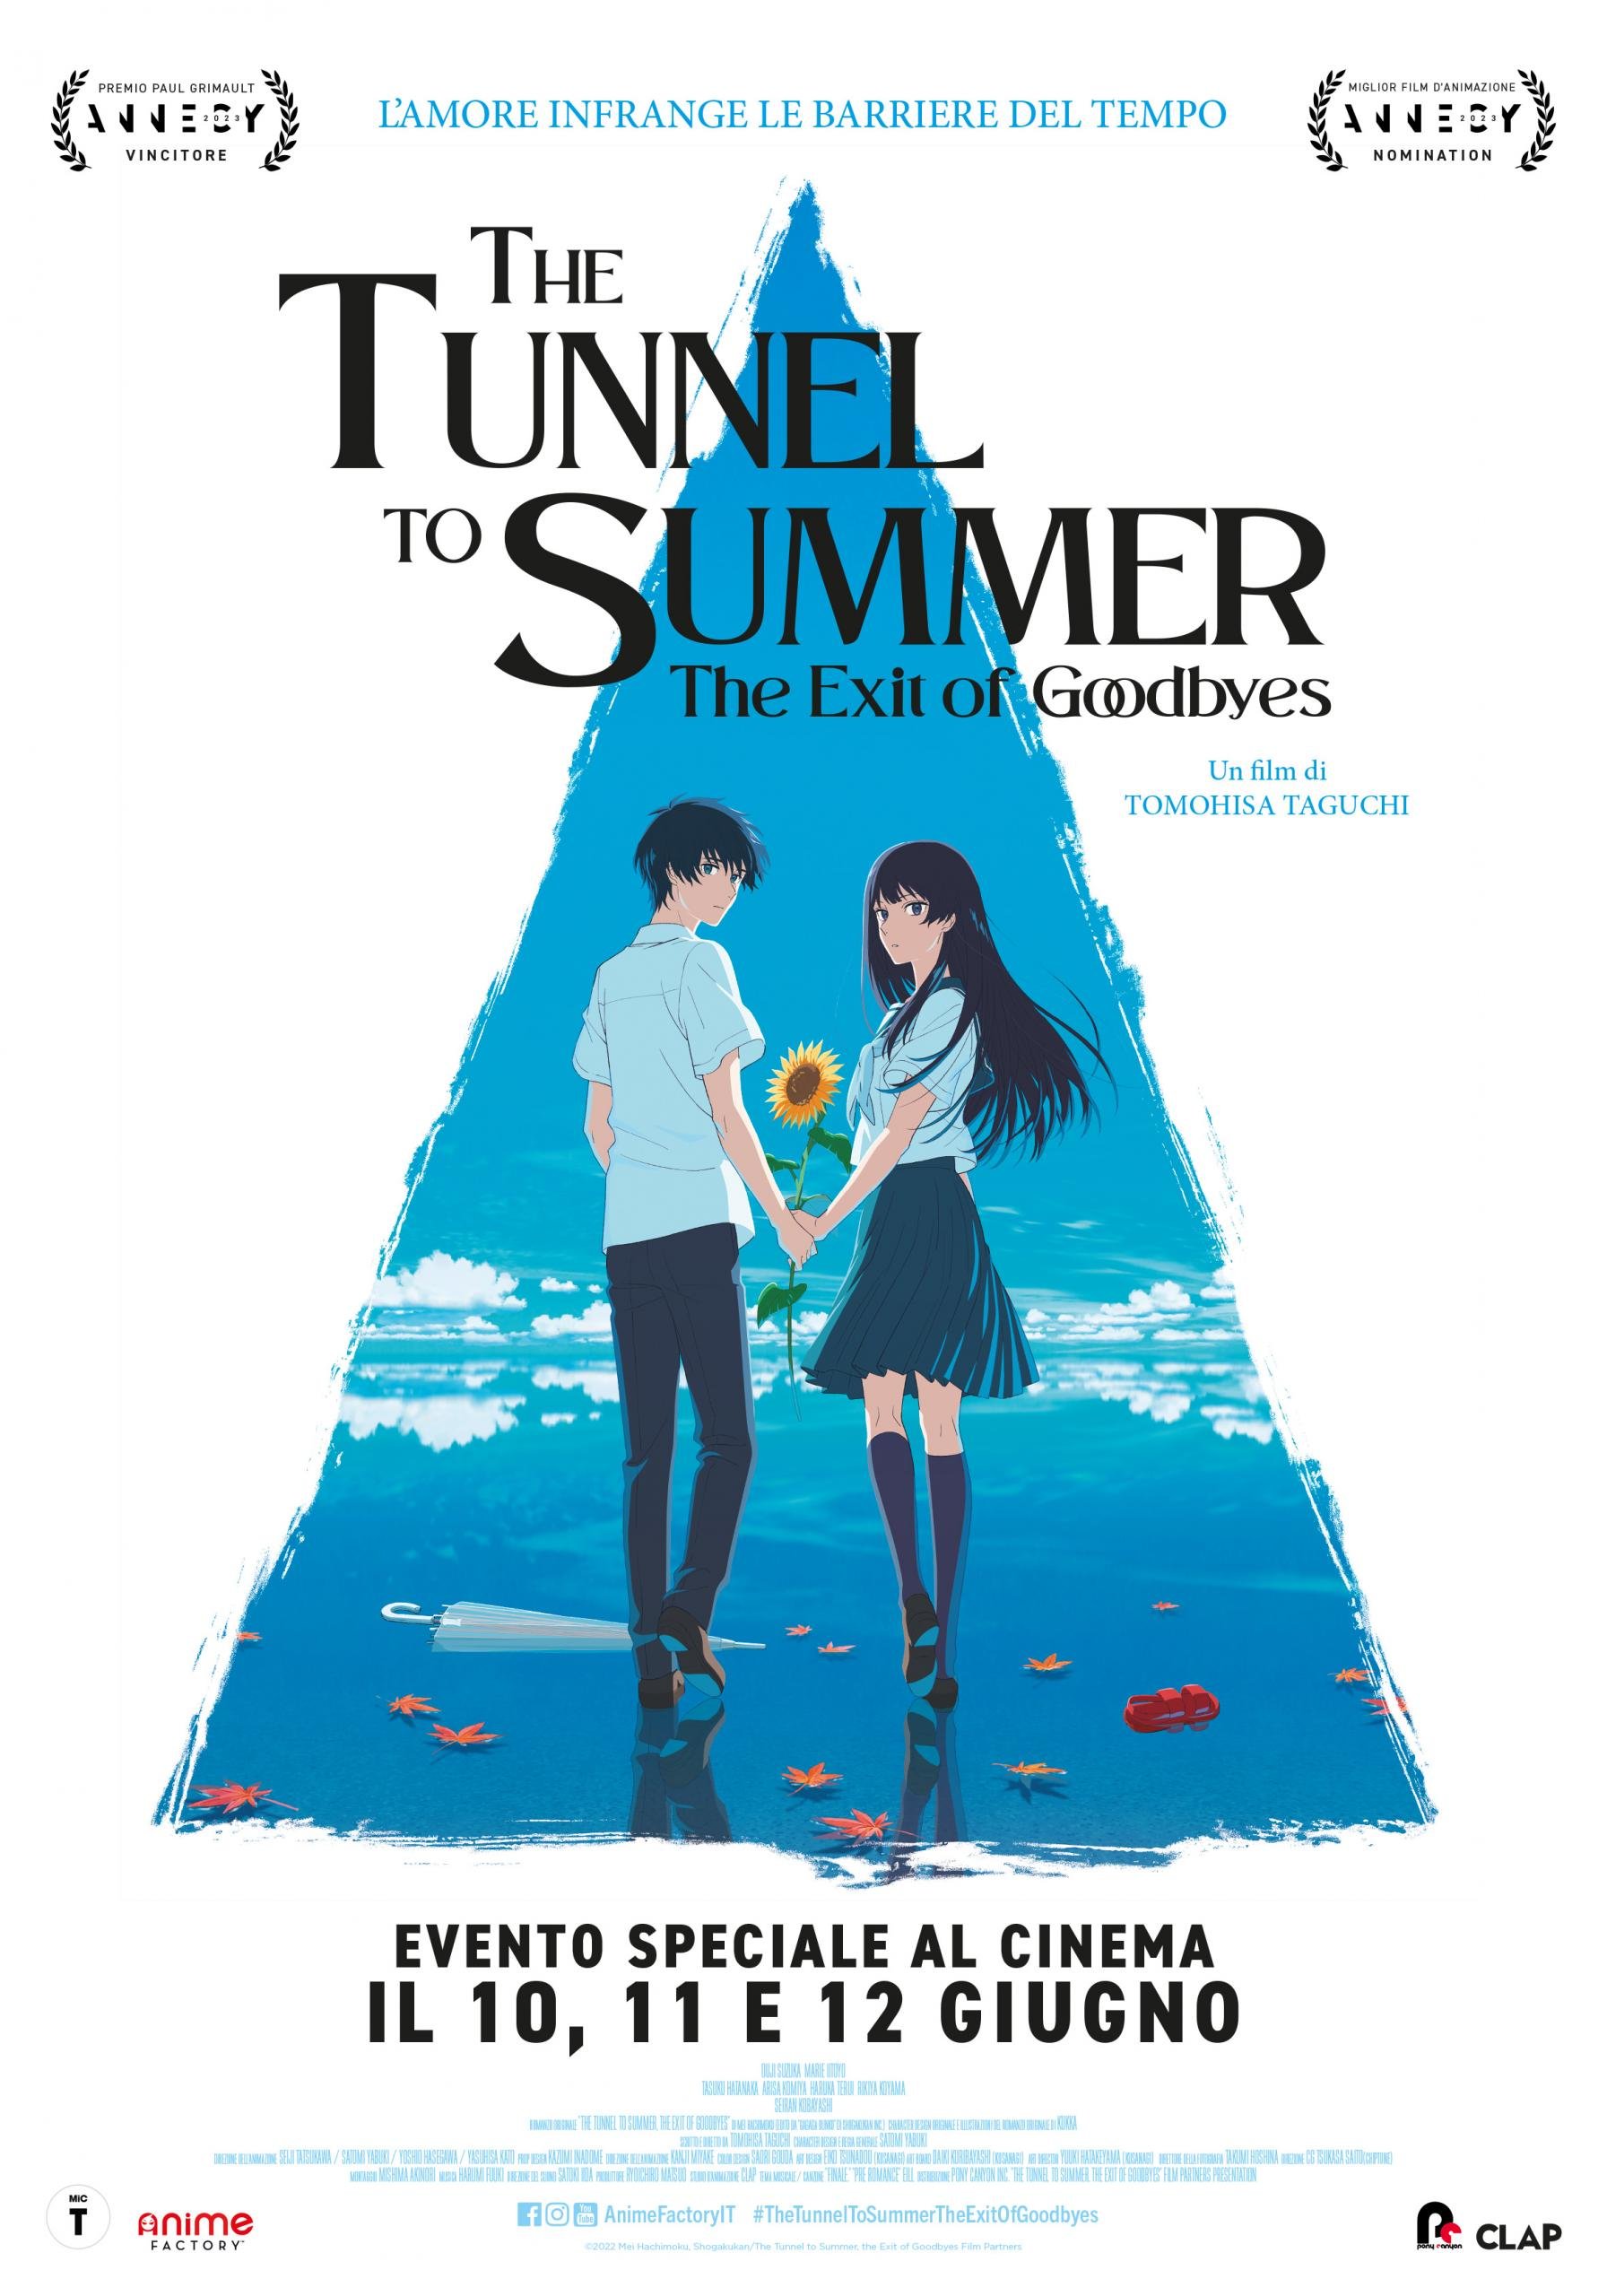 The-Tunnel-to-Summer-the-Exit-of-Goodbyes-Poster-ufficiale-italiano-scaled.jpg